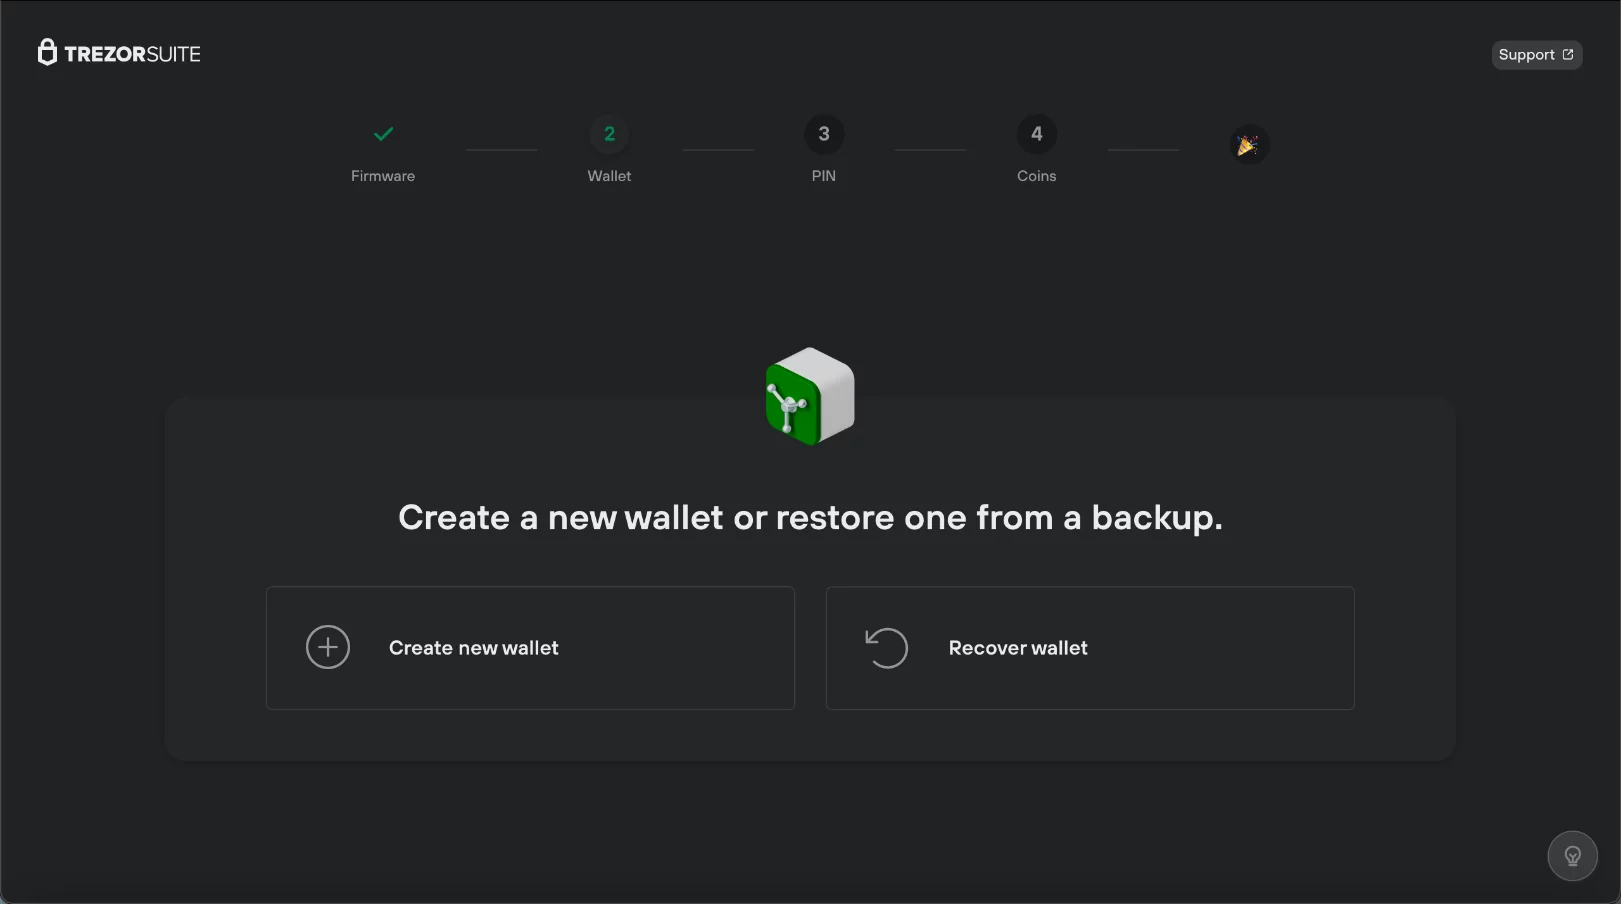 Step-by-Step Guide on How to Restore Your Trezor Wallet